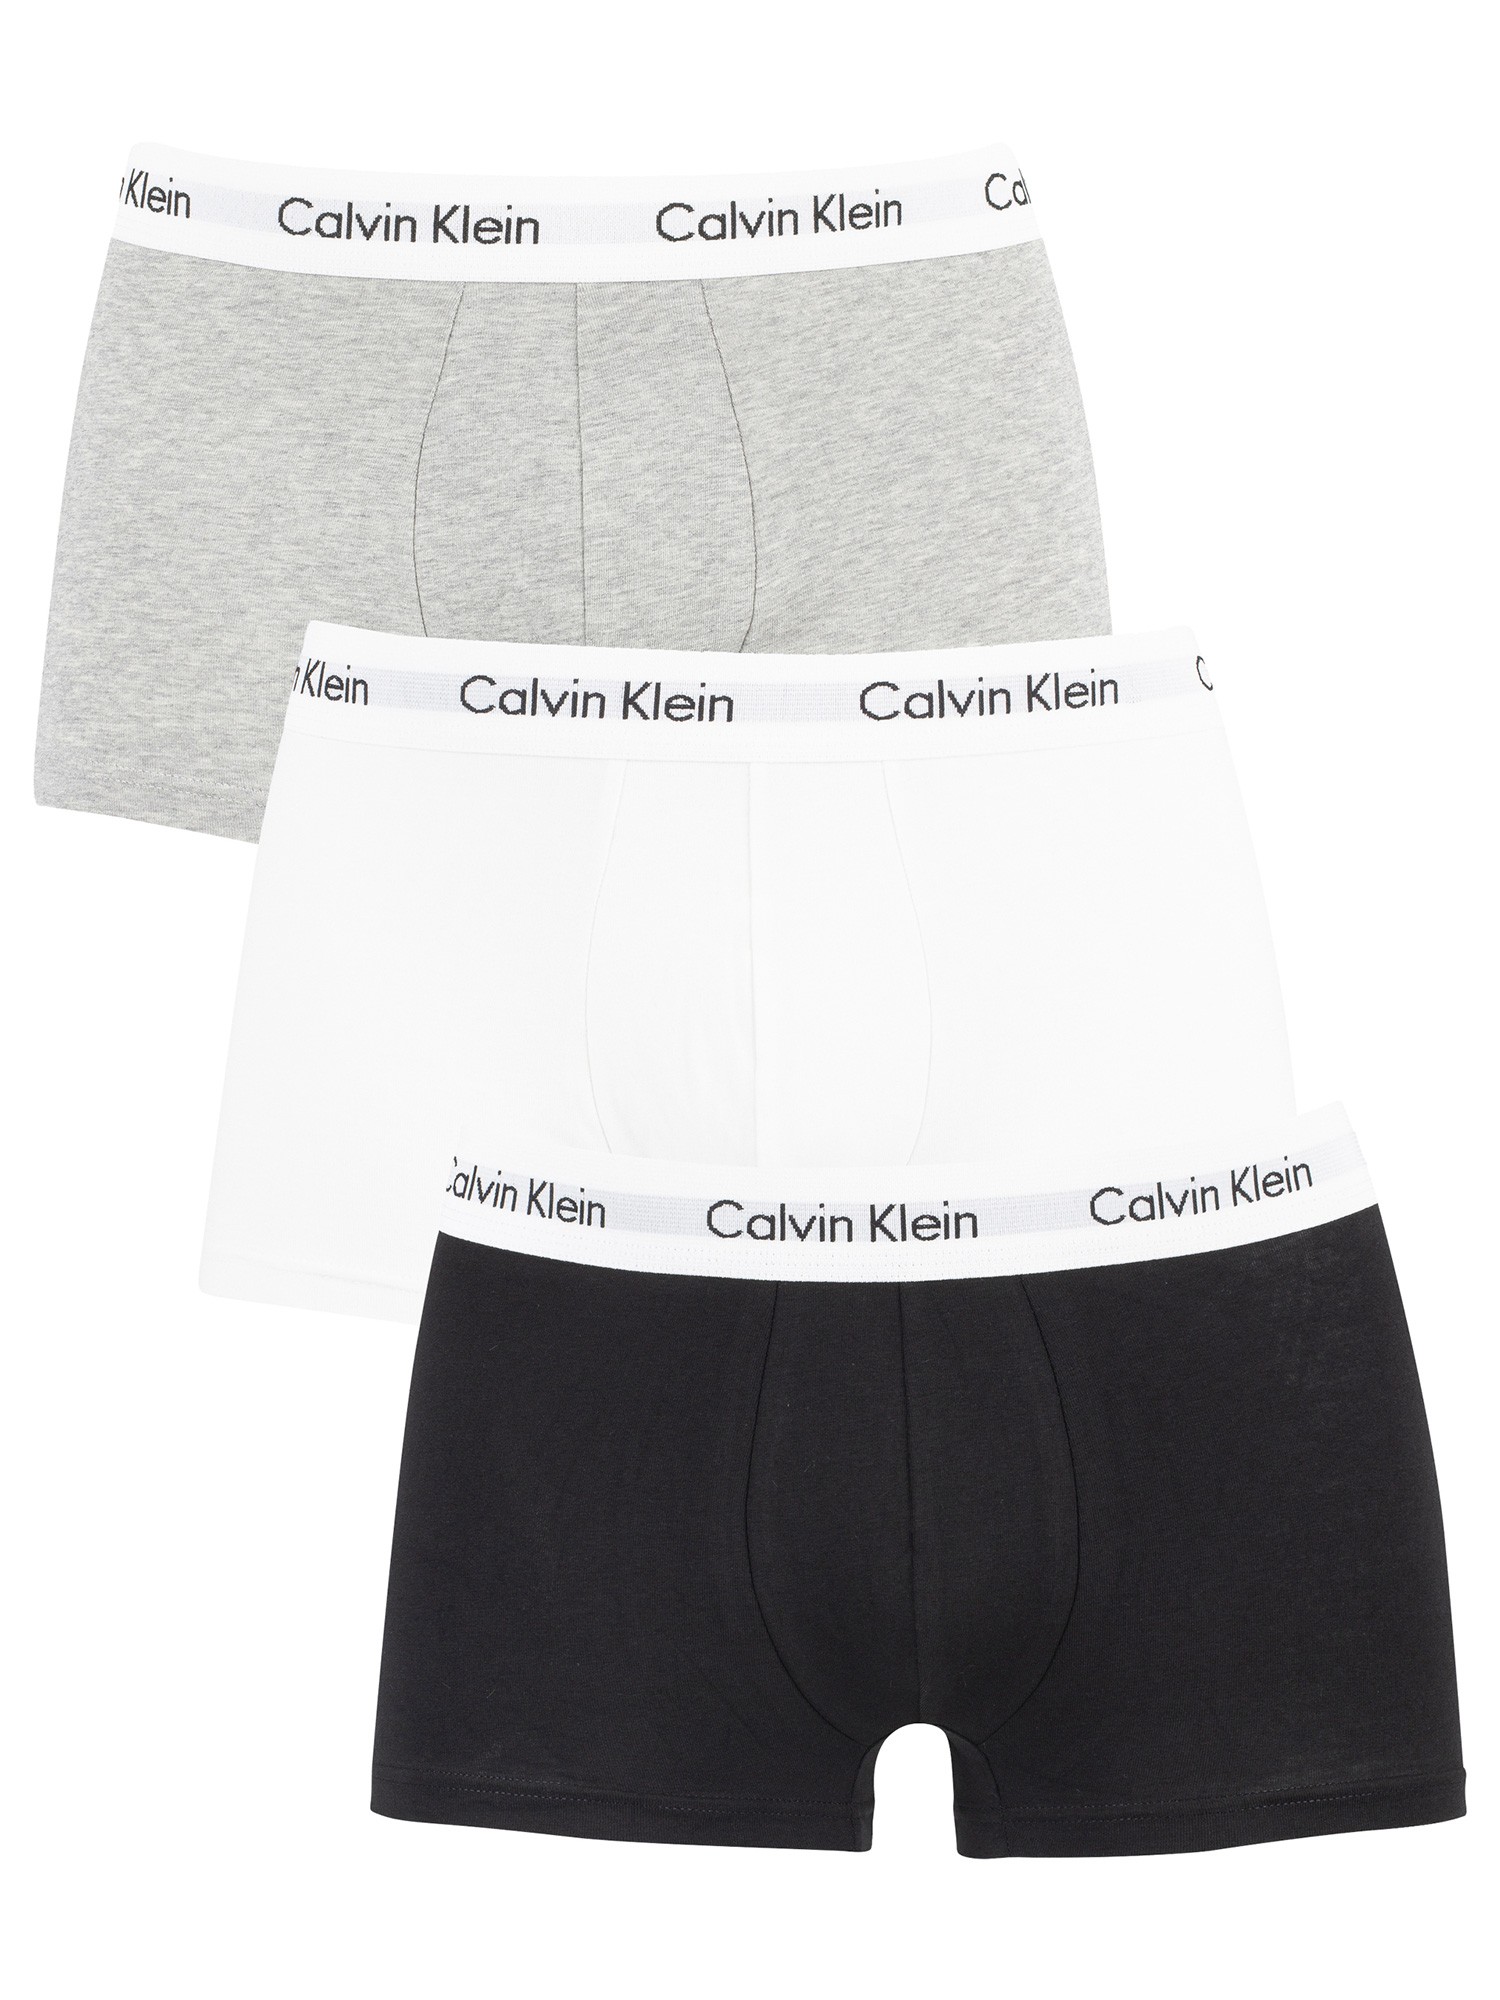 3 Pack Low Rise Trunks